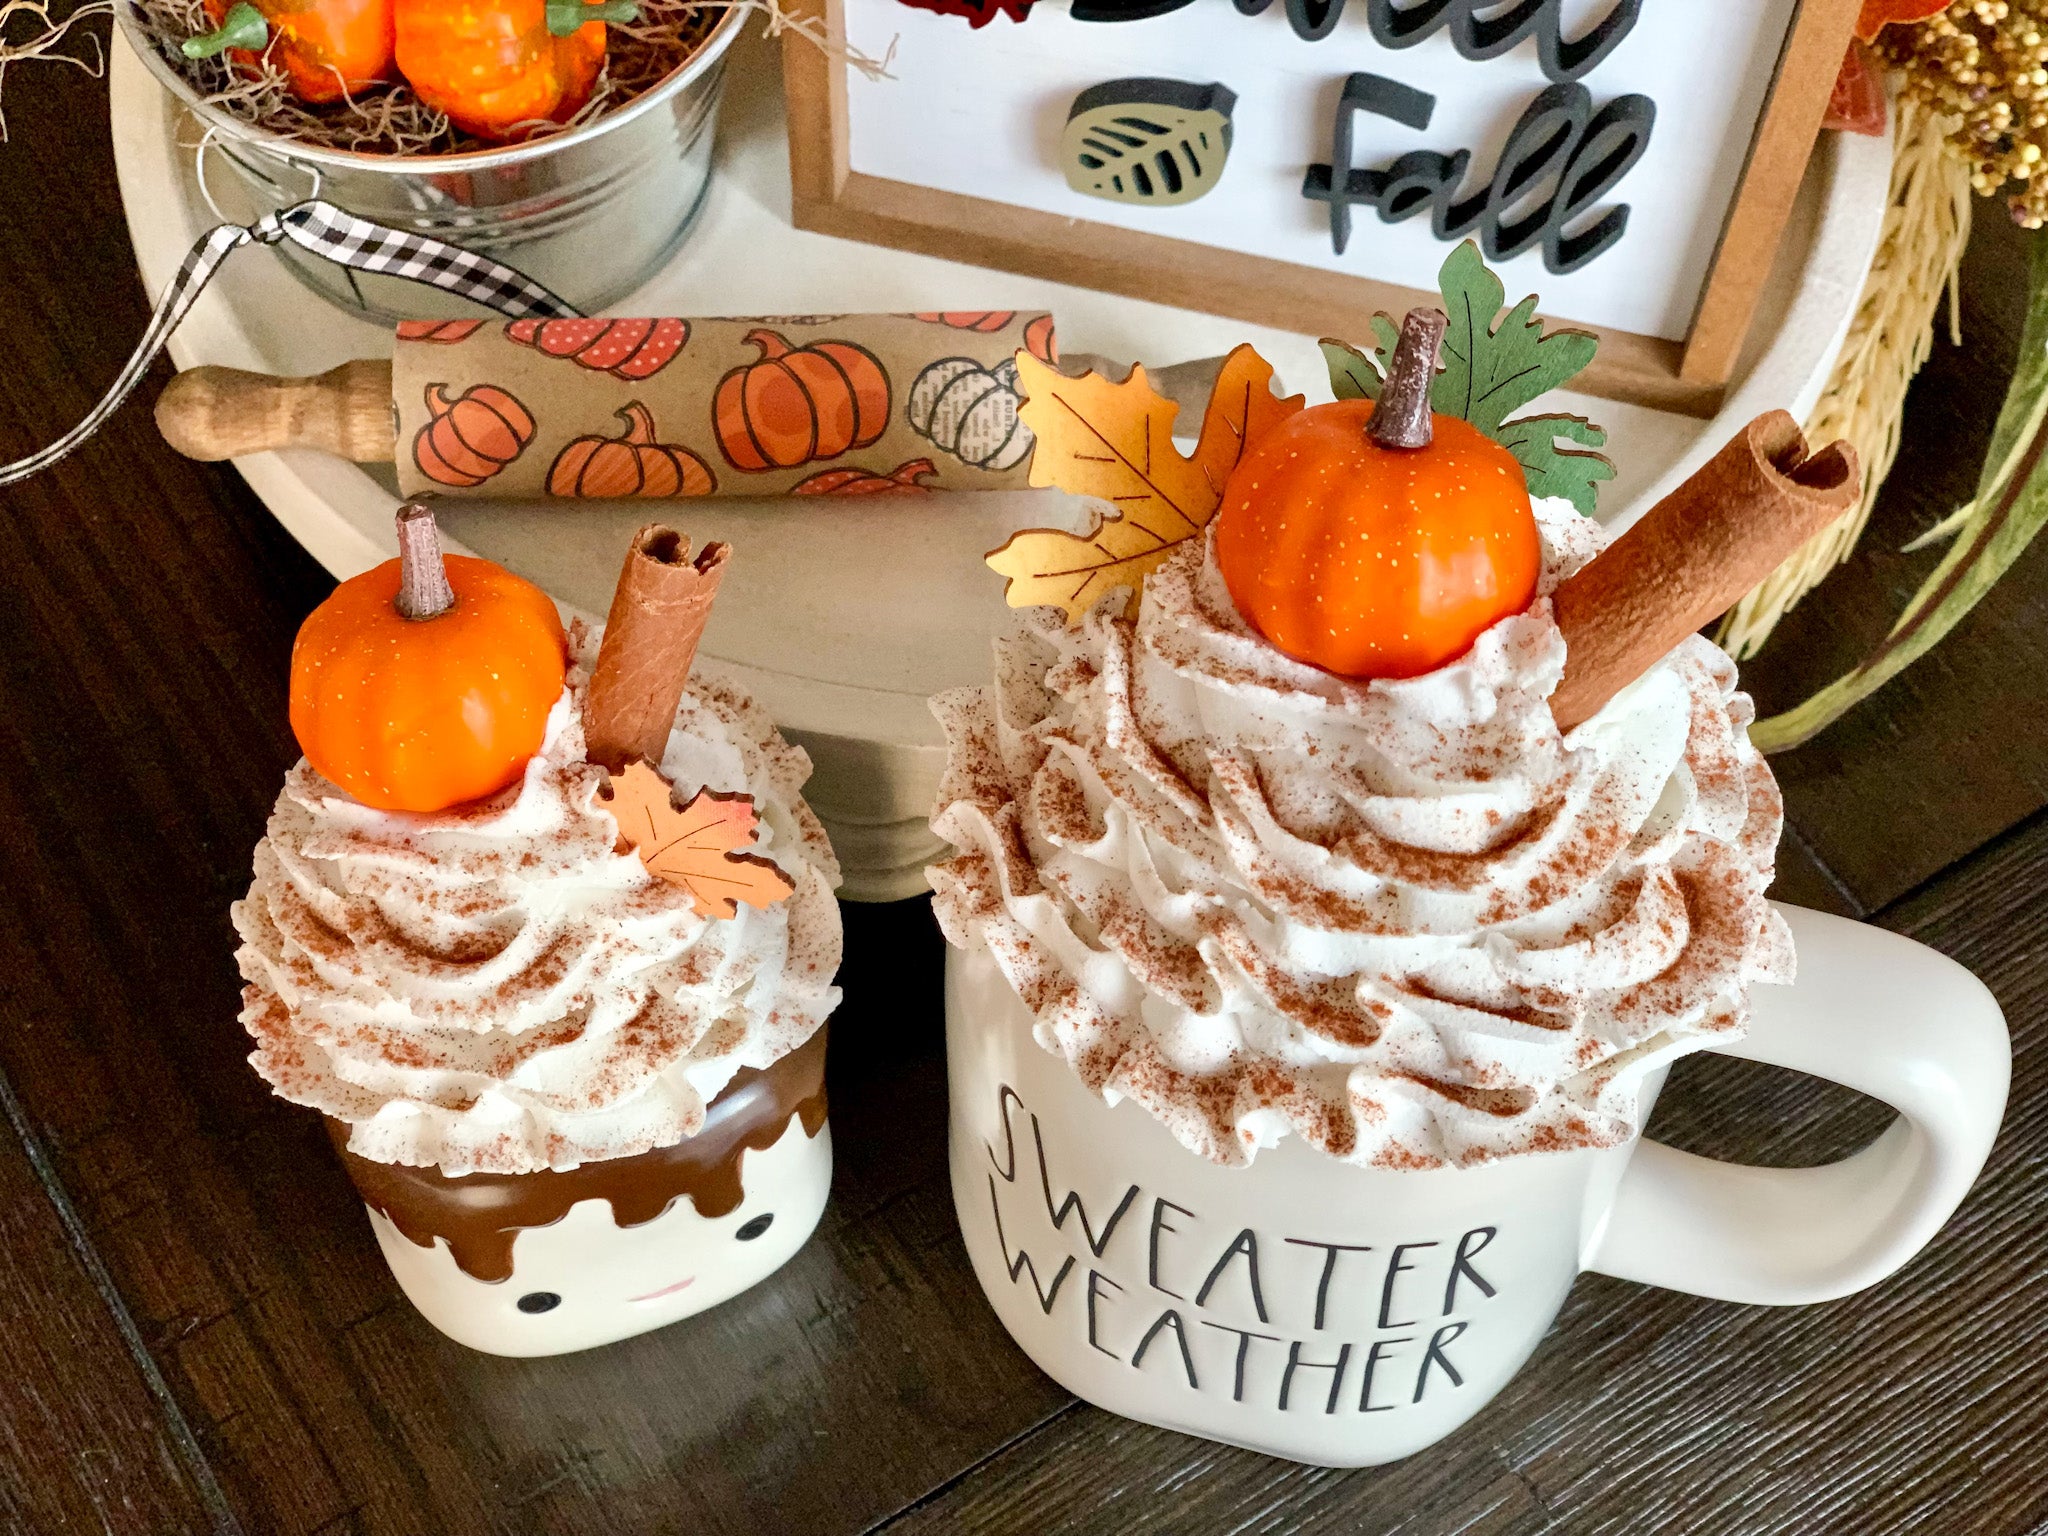 Fall Faux Whipped Cream Mug Topper-TOPPER ONLY! – Maison and Willow